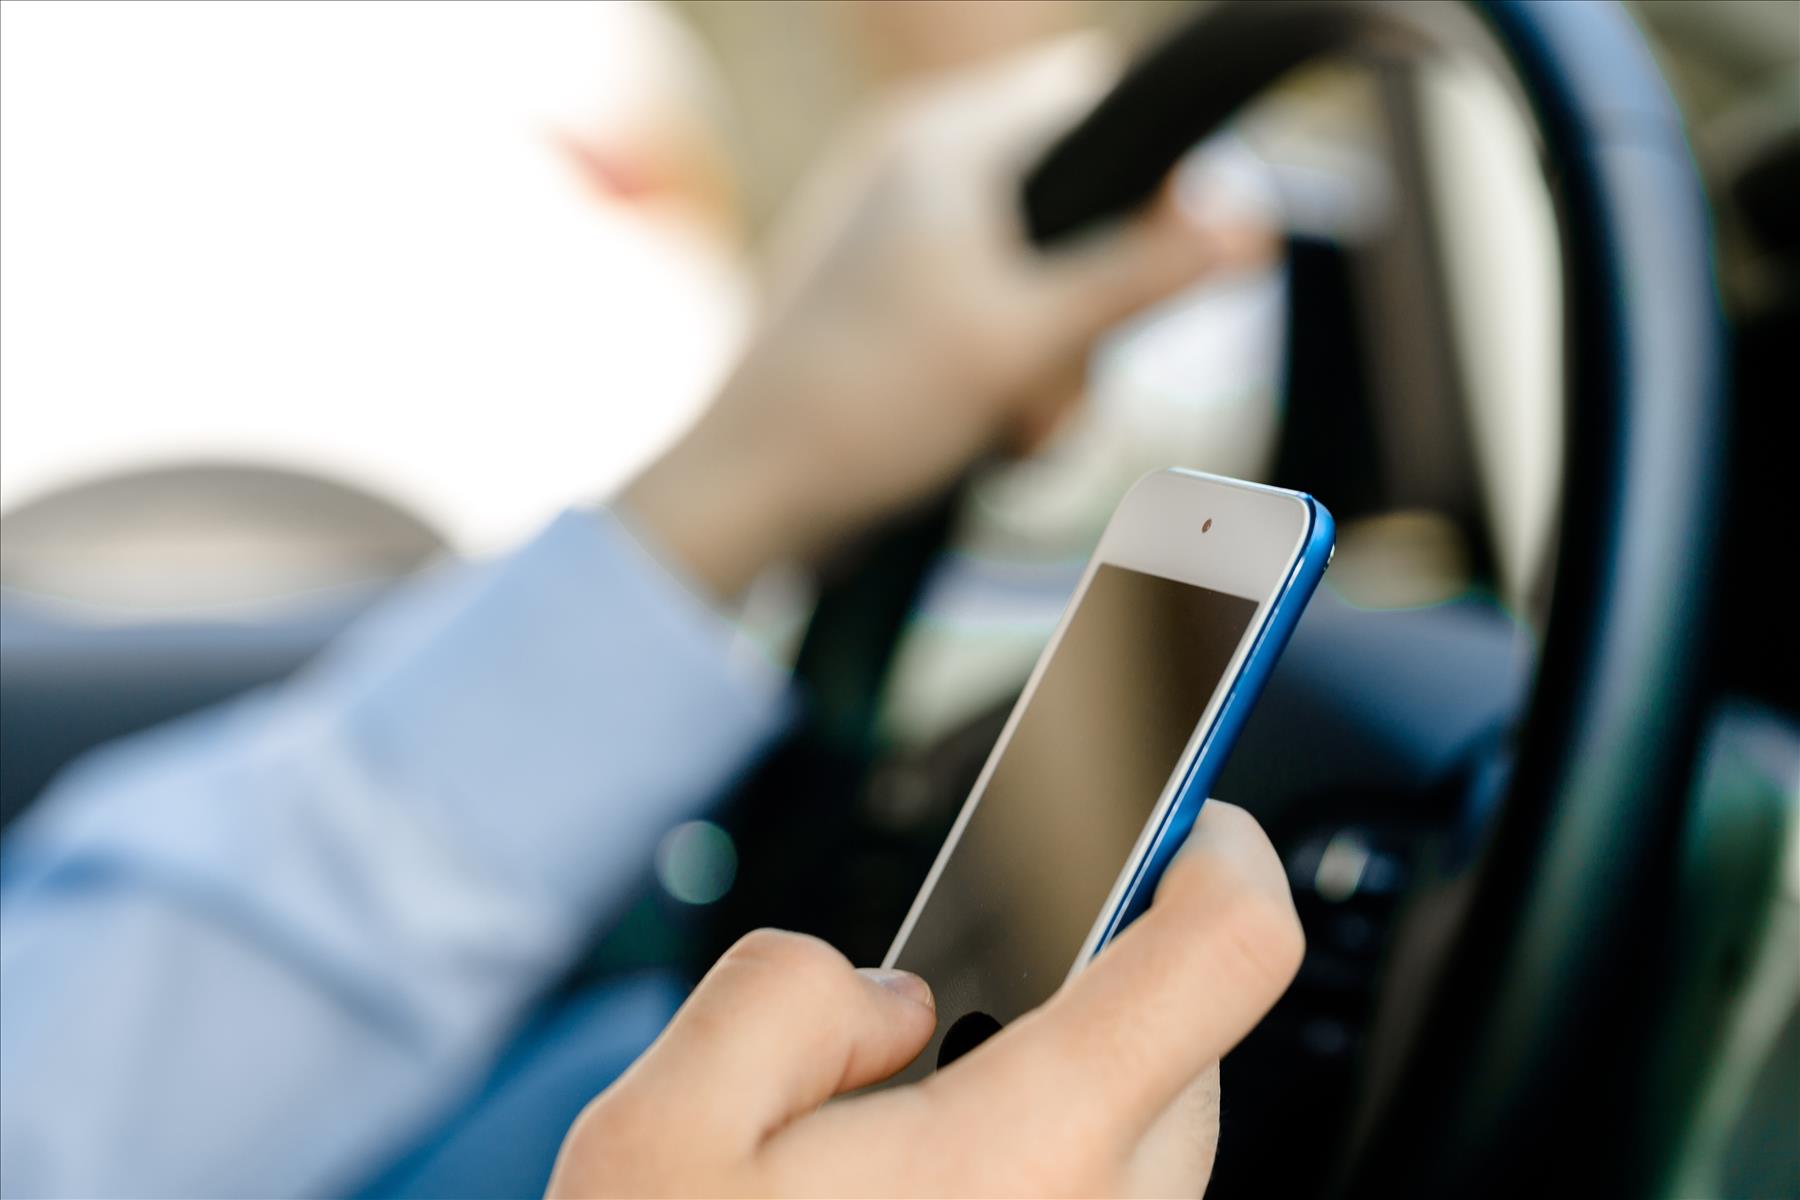 Automobile Accidents Caused by Distracted Driving in Canada